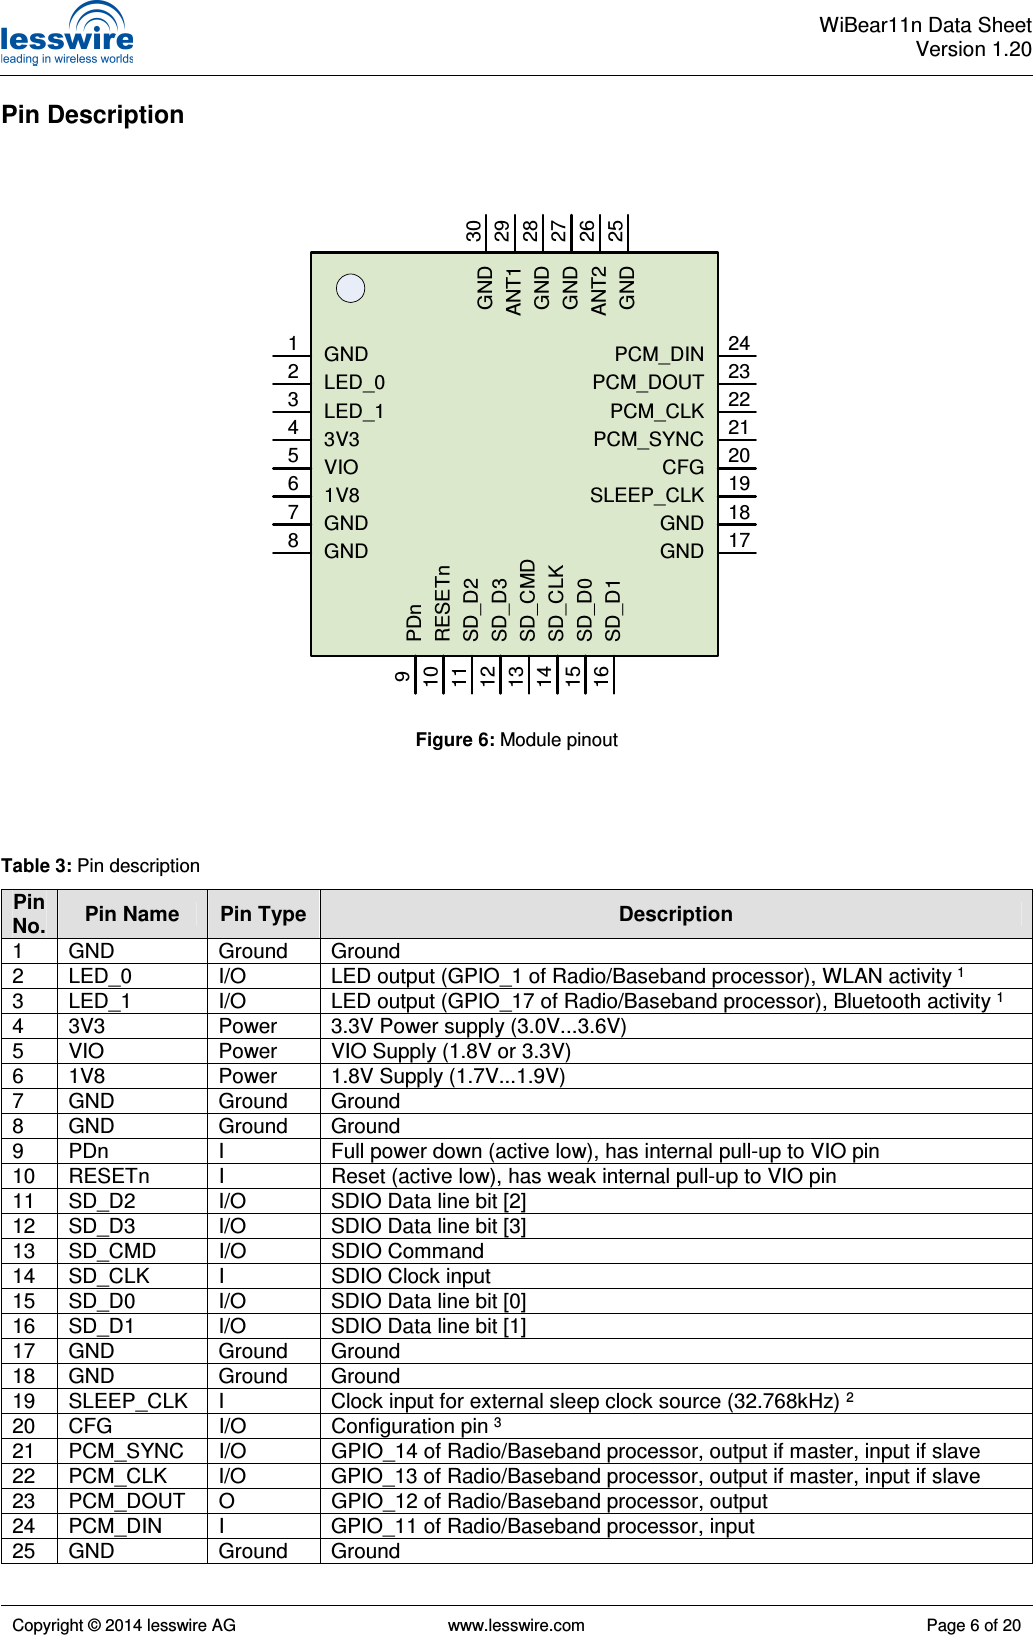  WiBear11n Data SheetVersion 1.20   Copyright © 2014 lesswire AG   www.lesswire.com  Page 6 of 20  Pin Description                                Table 3: Pin description Pin No. Pin Name  Pin Type  Description 1  GND  Ground  Ground 2  LED_0  I/O  LED output (GPIO_1 of Radio/Baseband processor), WLAN activity 1 3  LED_1  I/O  LED output (GPIO_17 of Radio/Baseband processor), Bluetooth activity 1 4  3V3  Power  3.3V Power supply (3.0V...3.6V) 5  VIO  Power  VIO Supply (1.8V or 3.3V) 6  1V8  Power  1.8V Supply (1.7V...1.9V) 7  GND  Ground  Ground 8  GND  Ground  Ground 9  PDn  I  Full power down (active low), has internal pull-up to VIO pin 10  RESETn  I  Reset (active low), has weak internal pull-up to VIO pin 11  SD_D2  I/O  SDIO Data line bit [2] 12  SD_D3  I/O  SDIO Data line bit [3] 13  SD_CMD  I/O  SDIO Command 14  SD_CLK  I  SDIO Clock input 15  SD_D0  I/O  SDIO Data line bit [0] 16  SD_D1  I/O  SDIO Data line bit [1] 17  GND  Ground  Ground 18  GND  Ground  Ground 19  SLEEP_CLK  I  Clock input for external sleep clock source (32.768kHz) 2 20  CFG  I/O  Configuration pin 3 21  PCM_SYNC  I/O  GPIO_14 of Radio/Baseband processor, output if master, input if slave 22  PCM_CLK  I/O  GPIO_13 of Radio/Baseband processor, output if master, input if slave 23  PCM_DOUT  O  GPIO_12 of Radio/Baseband processor, output 24  PCM_DIN  I  GPIO_11 of Radio/Baseband processor, input 25  GND  Ground  Ground GNDLED_0LED_13V3VIO1V8GNDGND12345678PDnRESETnSD_D2SD_D3SD_CMDSD_CLKSD_D0SD_D11415161011121392423222120191817GNDGNDSLEEP_CLKCFGPCM_SYNCPCM_CLKPCM_DOUTPCM_DIN302928272625GNDANT2GNDGNDANT1GNDFigure 6: Module pinout 